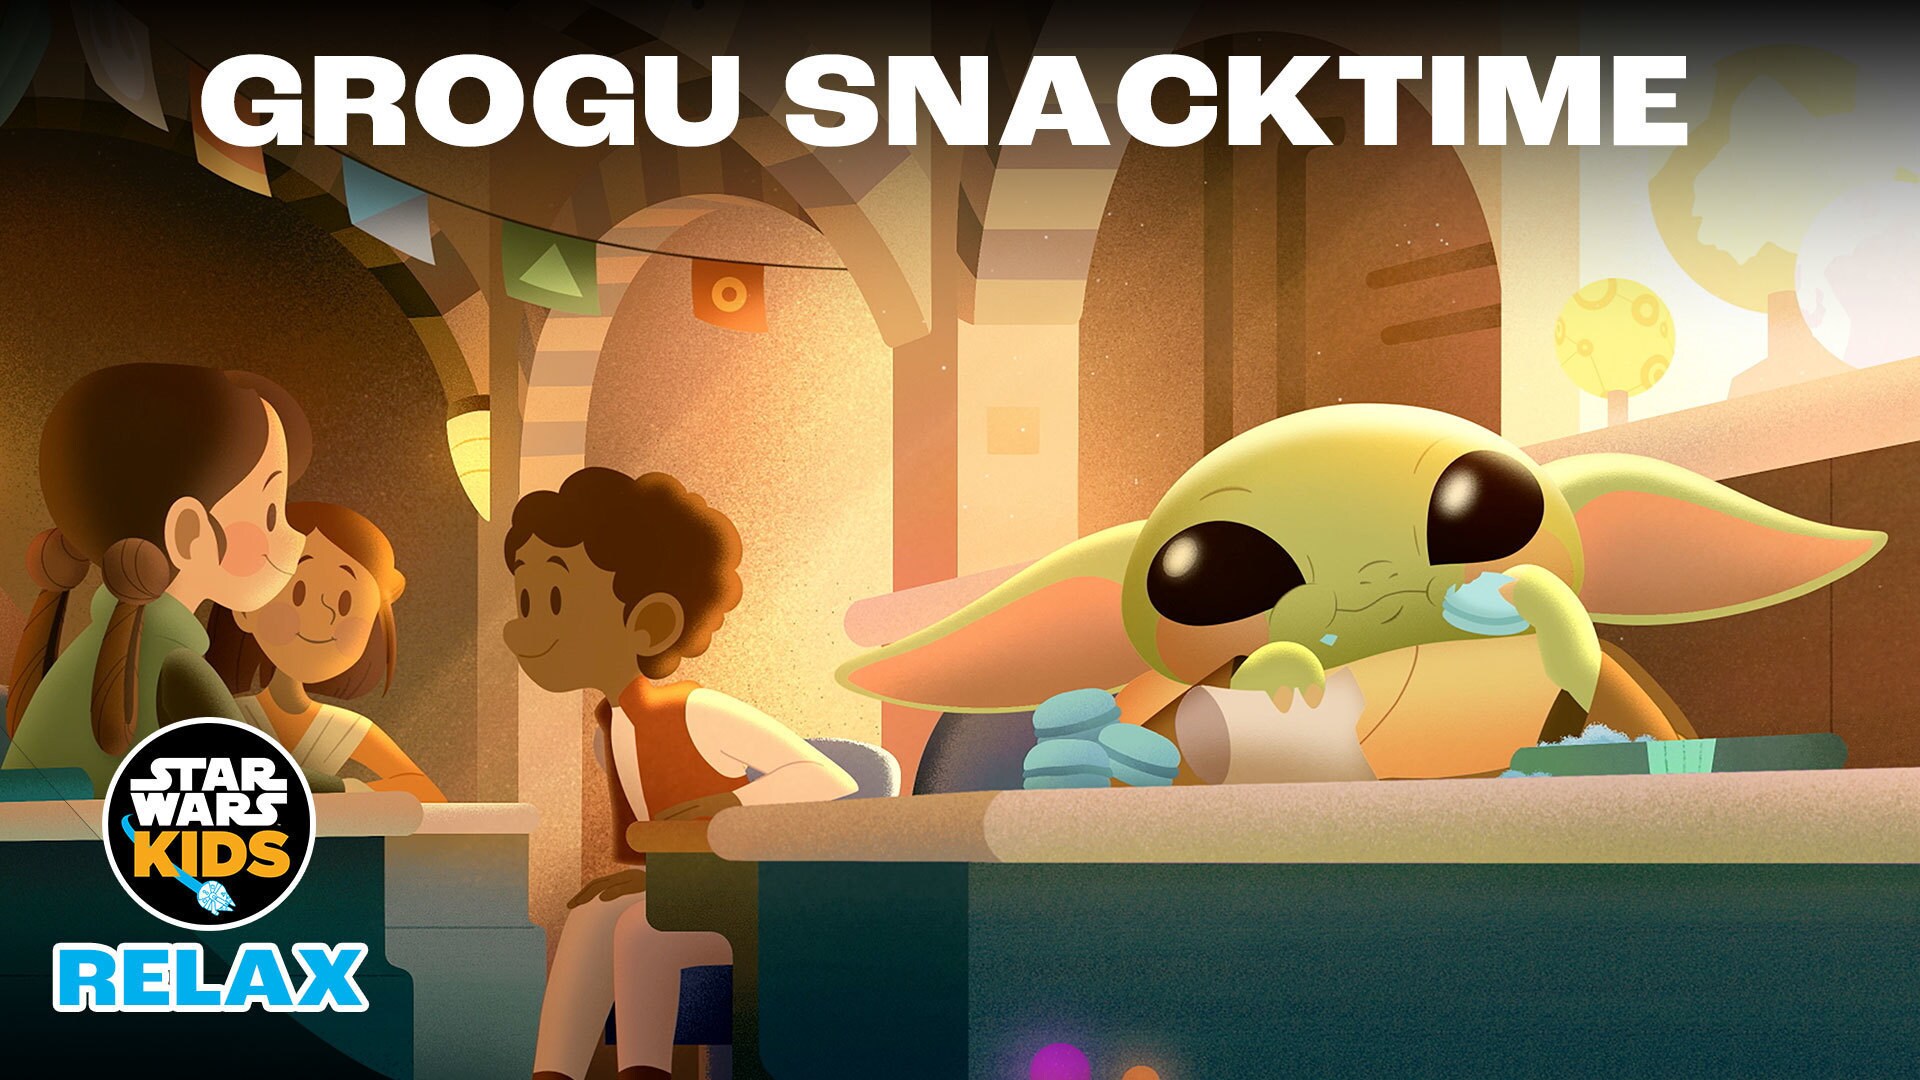 Snacktime with Grogu | Star Wars Kids: Relax